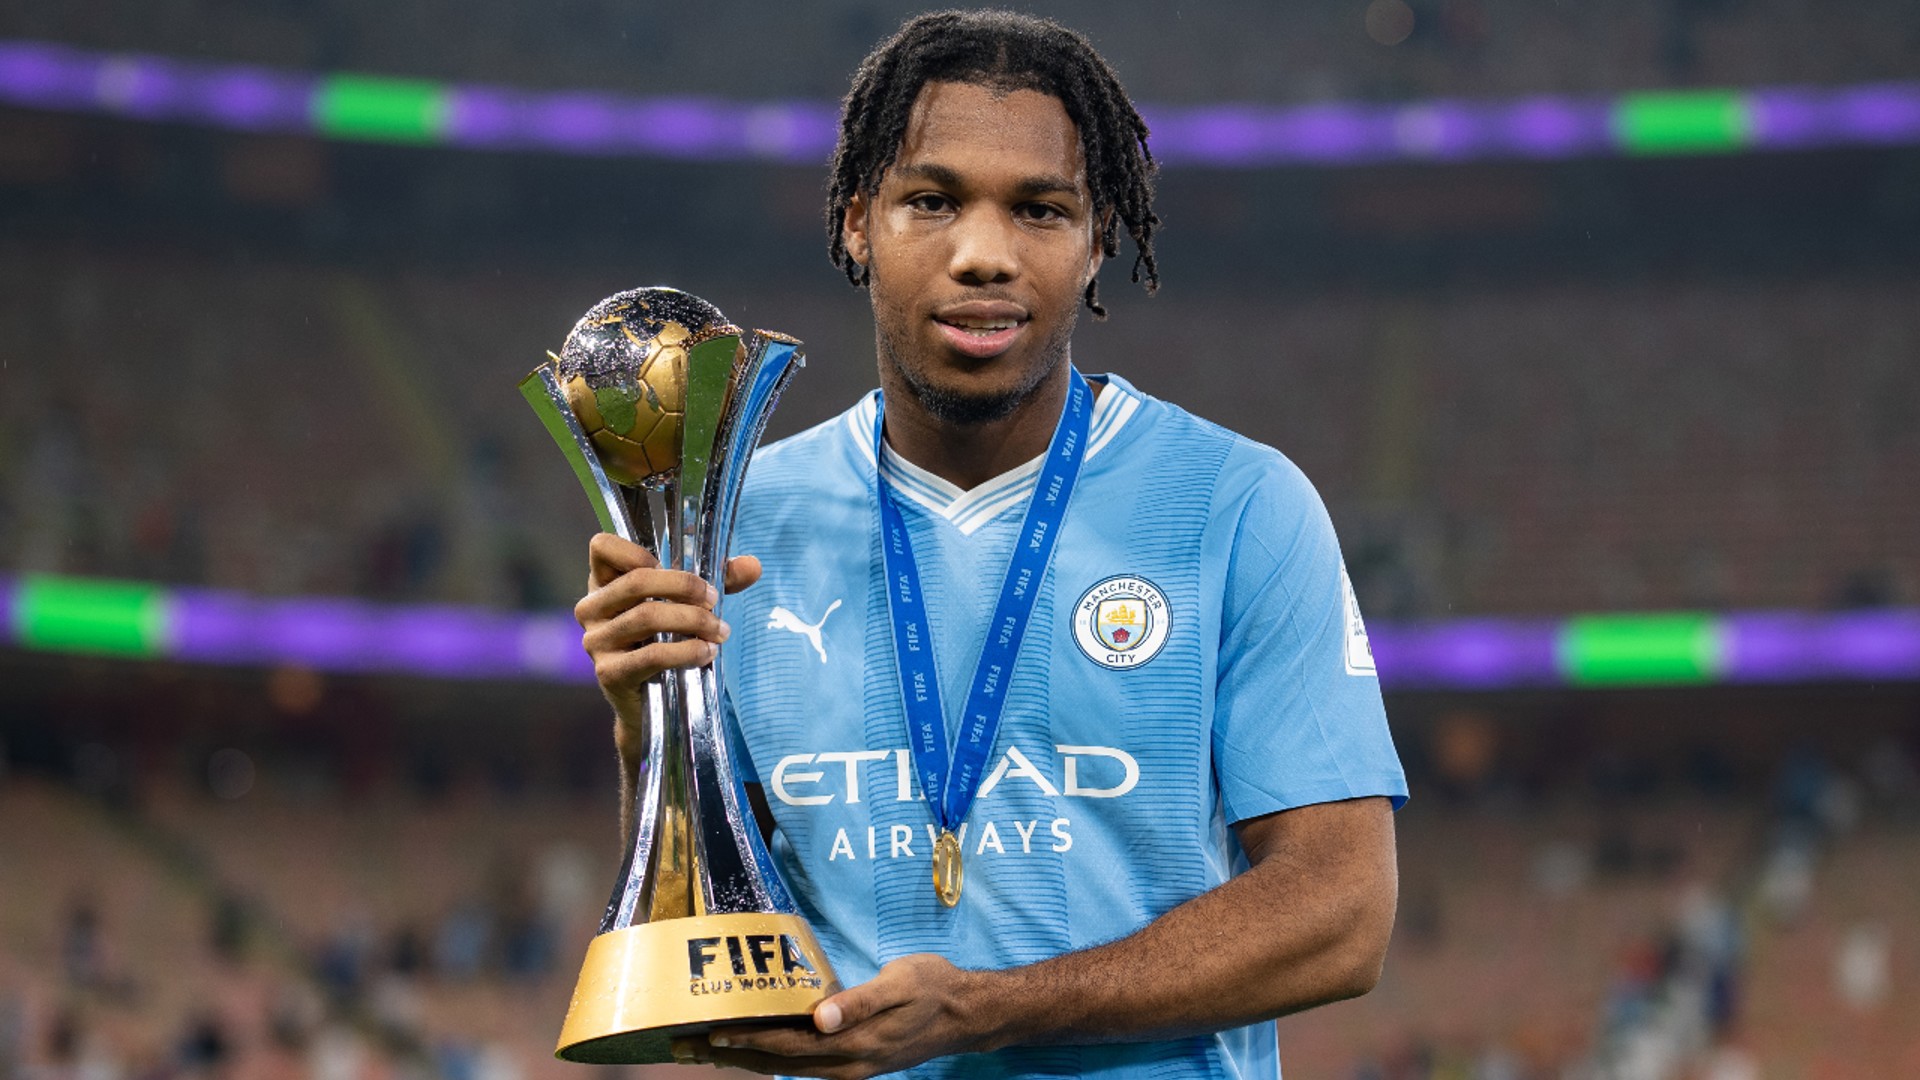 WORLD CHAMPION: Micah was also part of the City that lifted the FIFA Club World Cup last month.